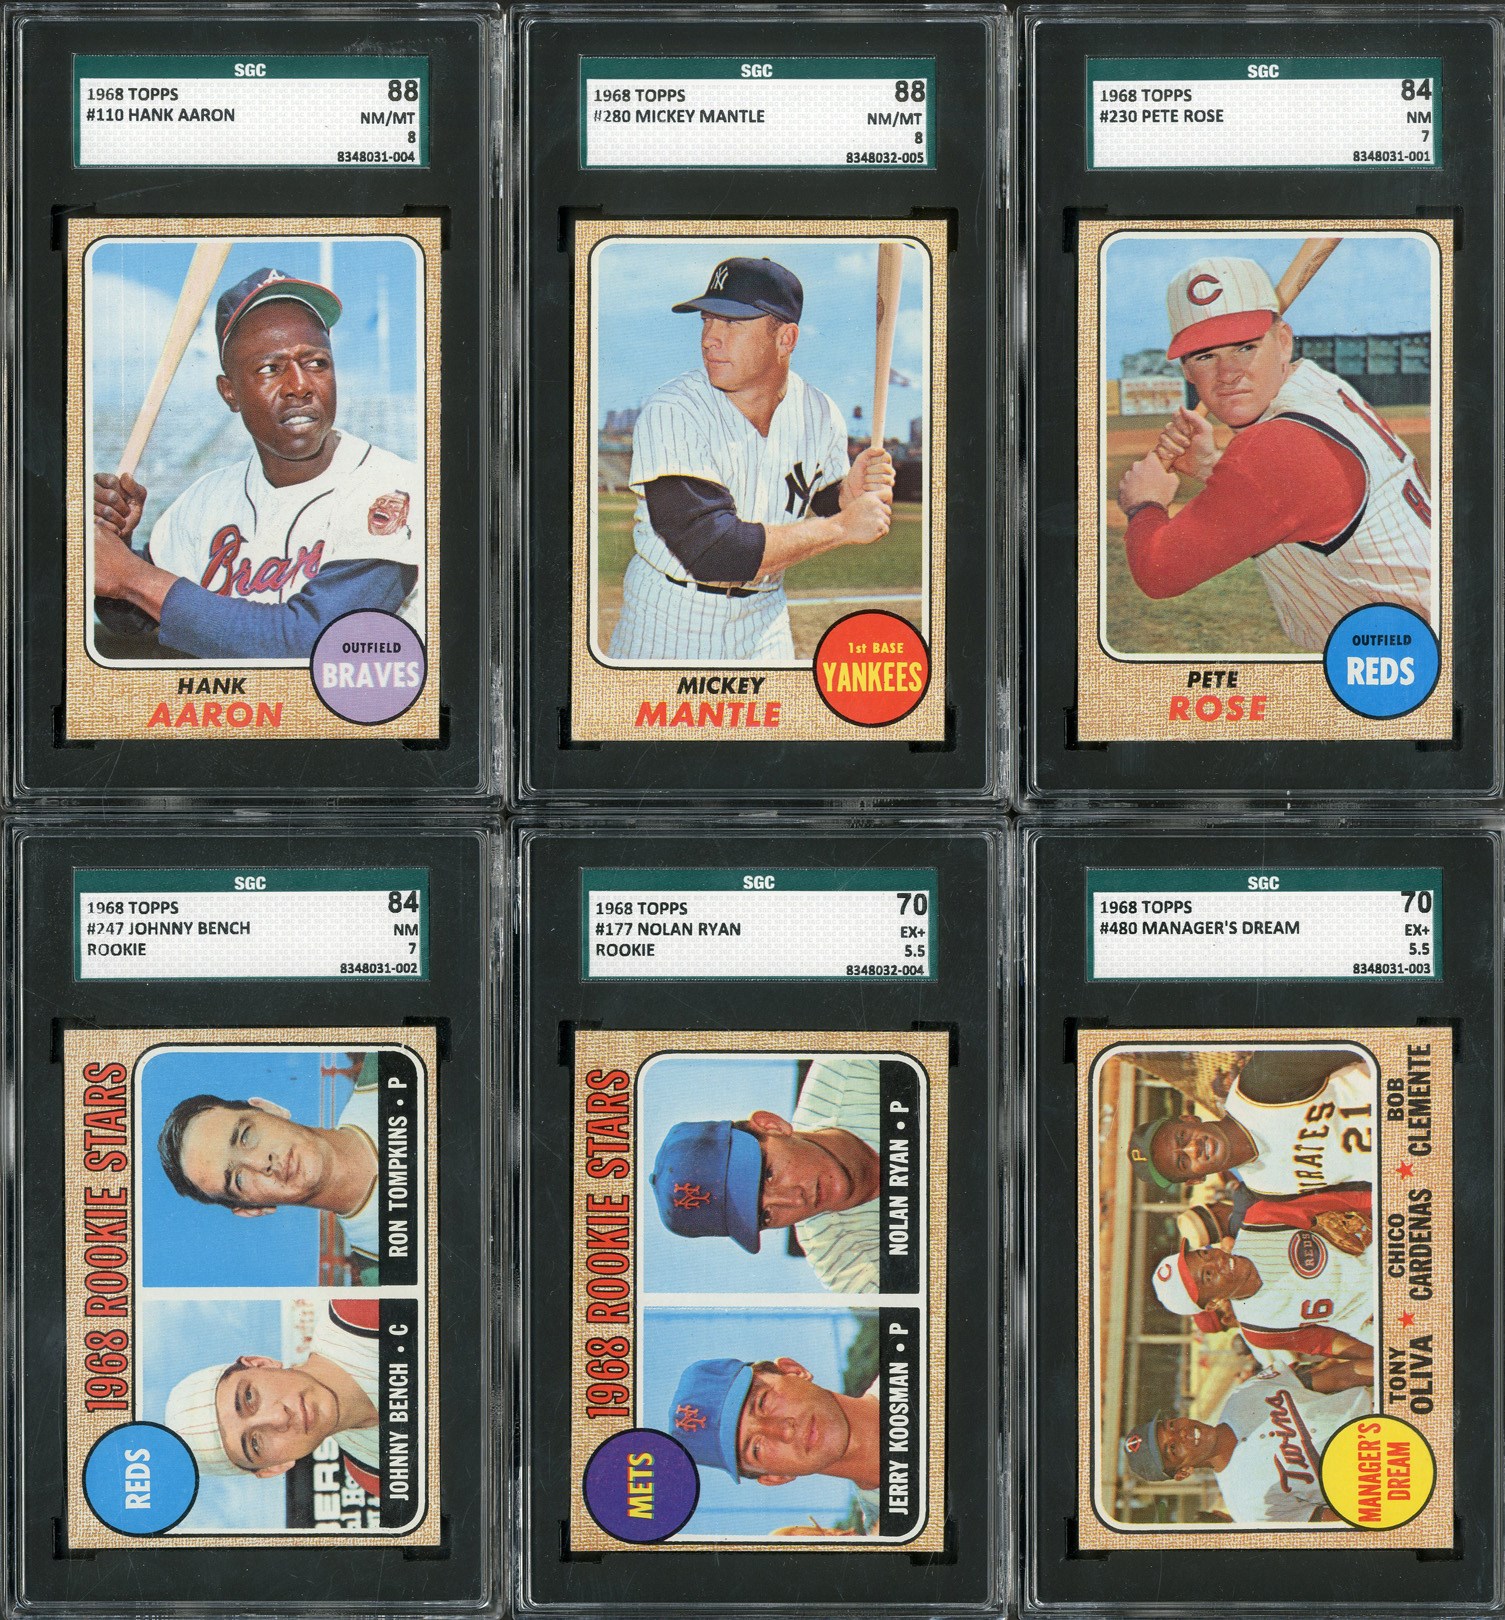 1968 Topps Complete Set (598 Cards - 6 SGC Graded)